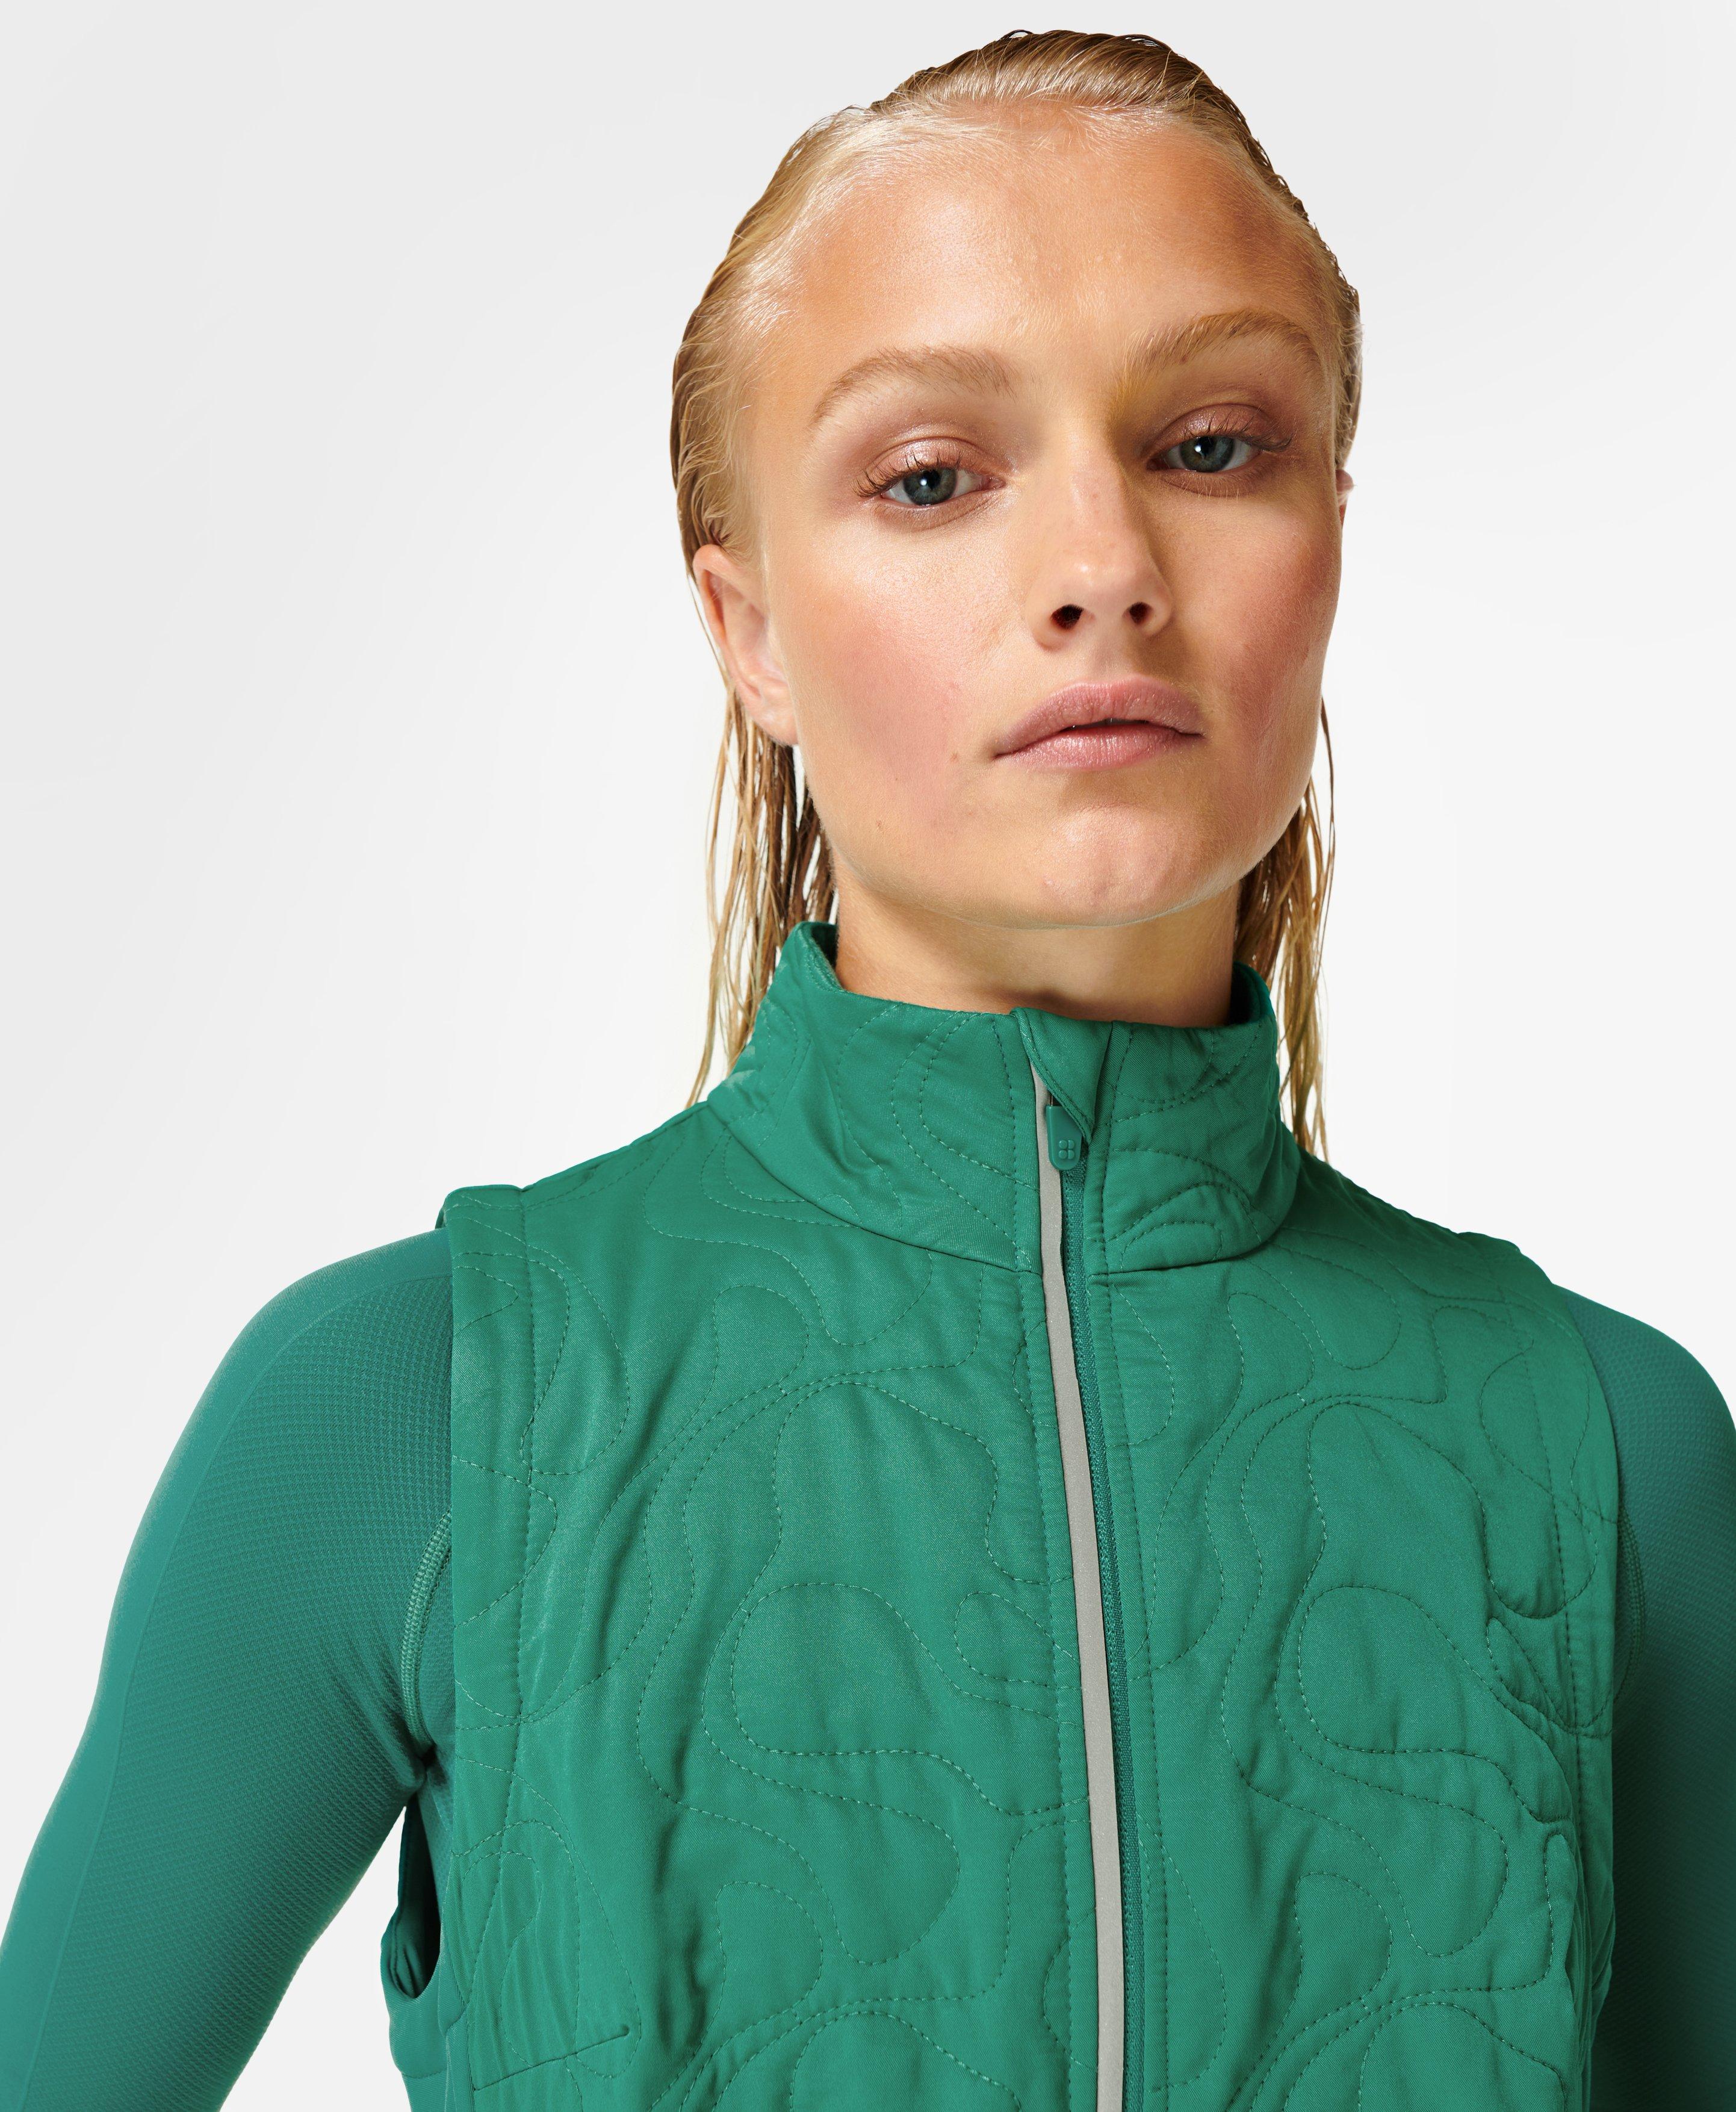 Sweaty Betty on The Move Quilted Jacket, Green, Women's M